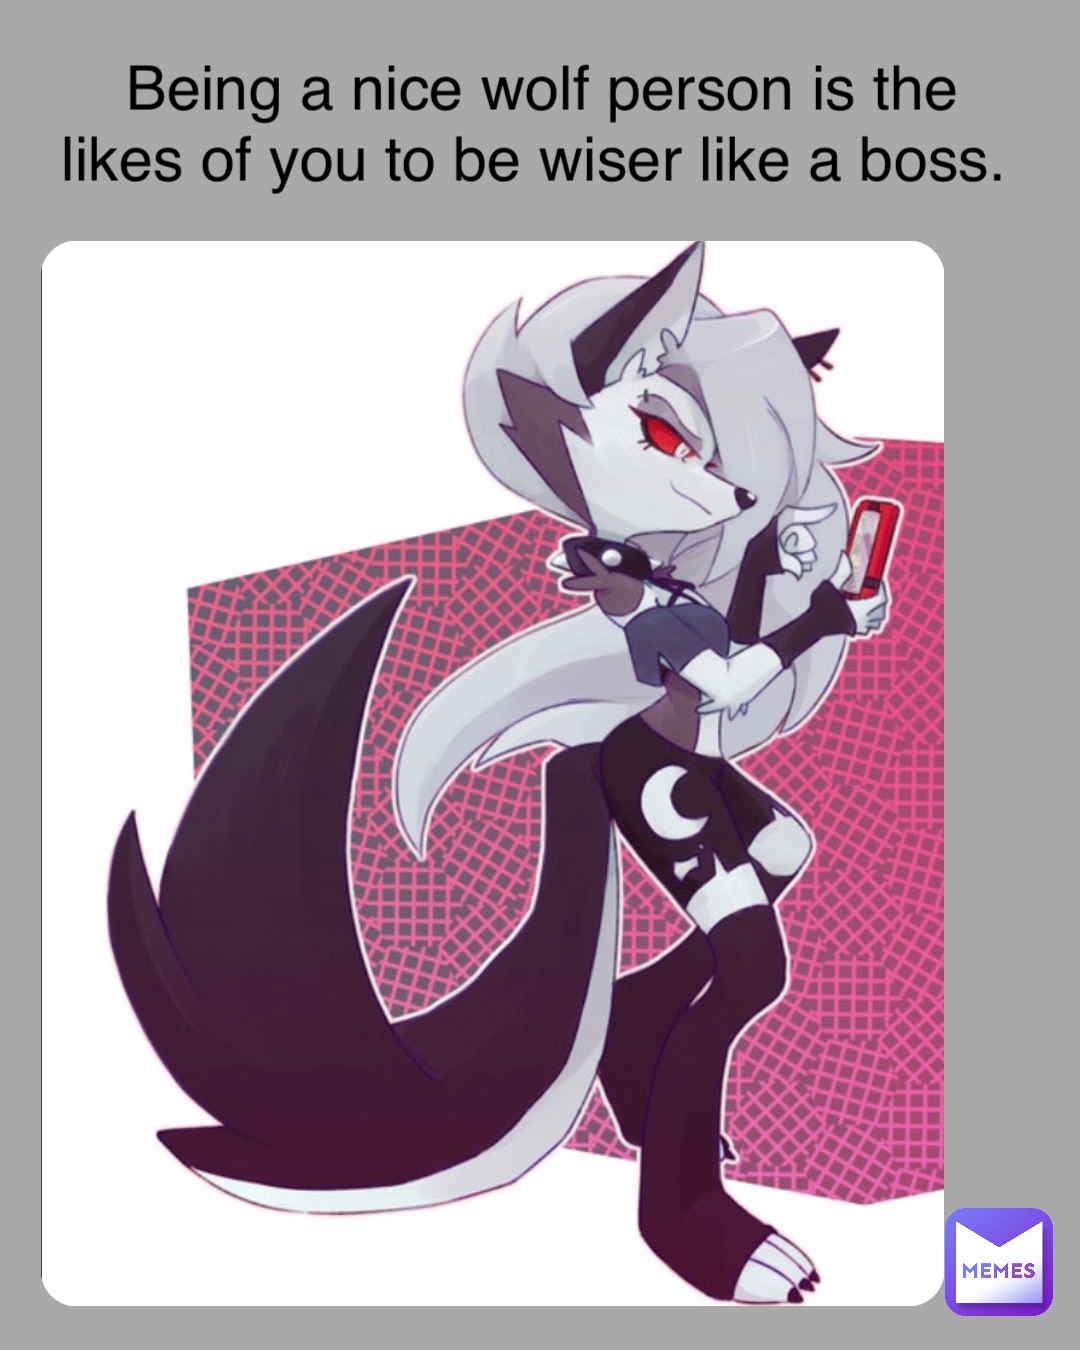 Being a nice wolf person is the likes of you to be wiser like a boss.